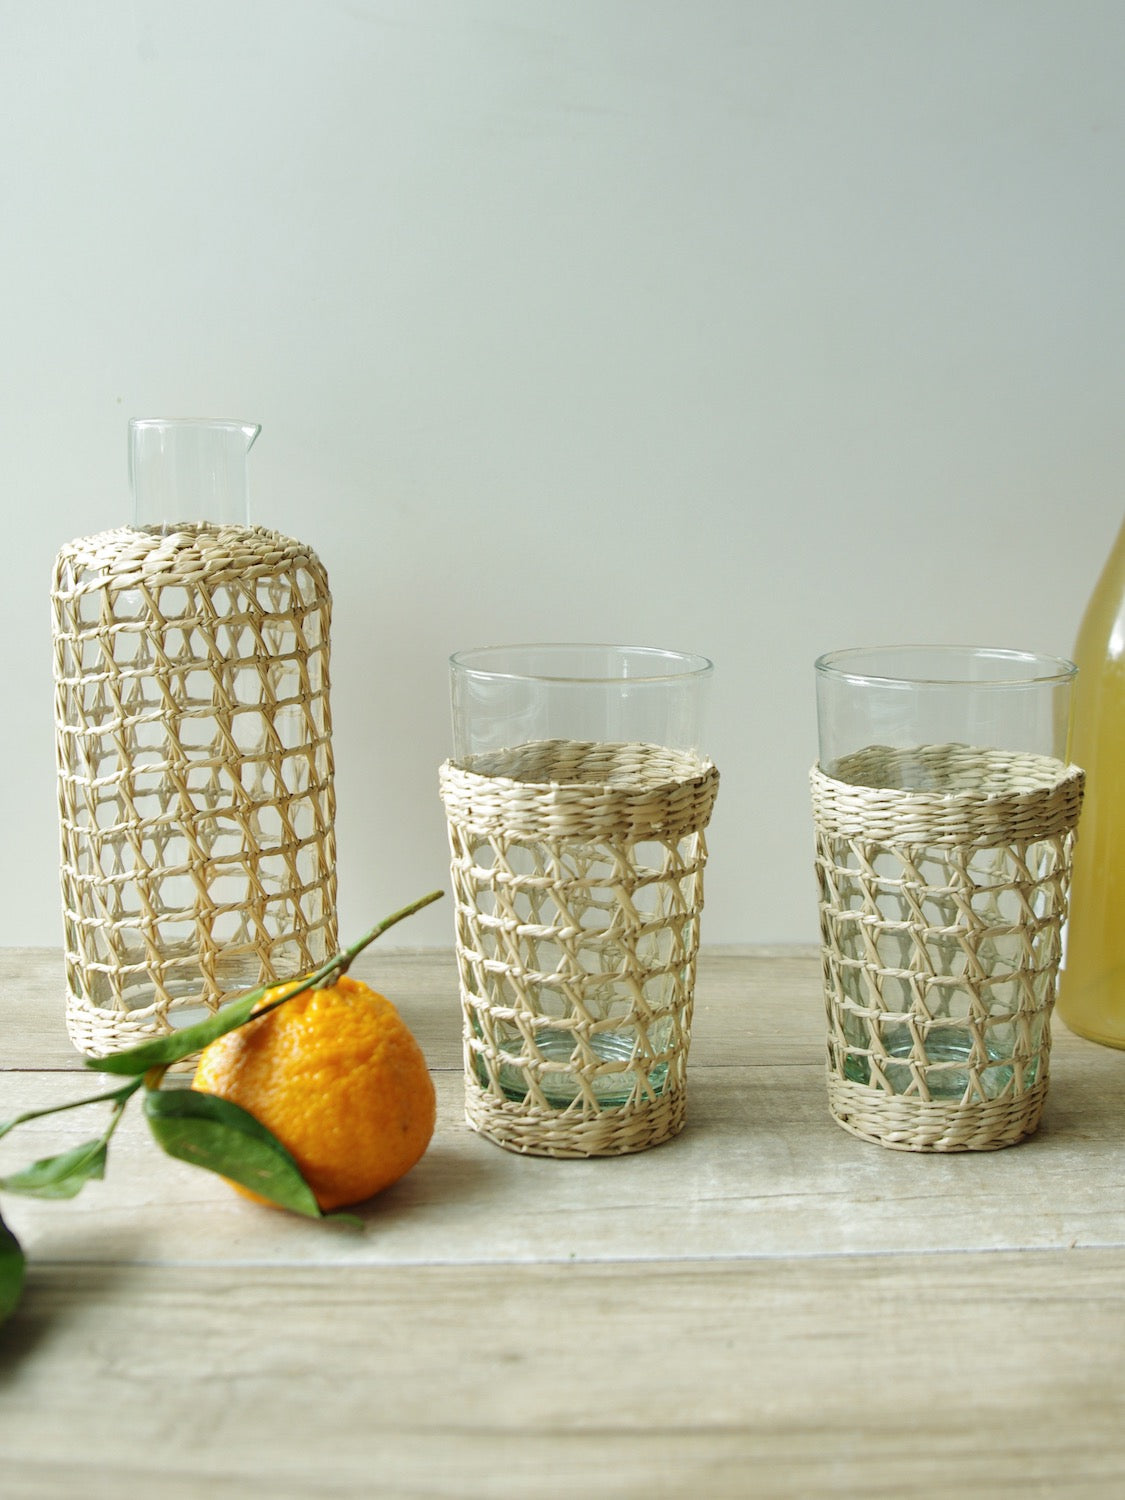 Seagrass Large Cage Carafe Glass Seagrass Brand_Seagrass & Rattan Carafes Kitchen_Drinkware Serving Pieces SeagrassWrappedCarafeandHighballGlasses_1125x1500_c518237a-599c-4253-a456-0c678b6d779a